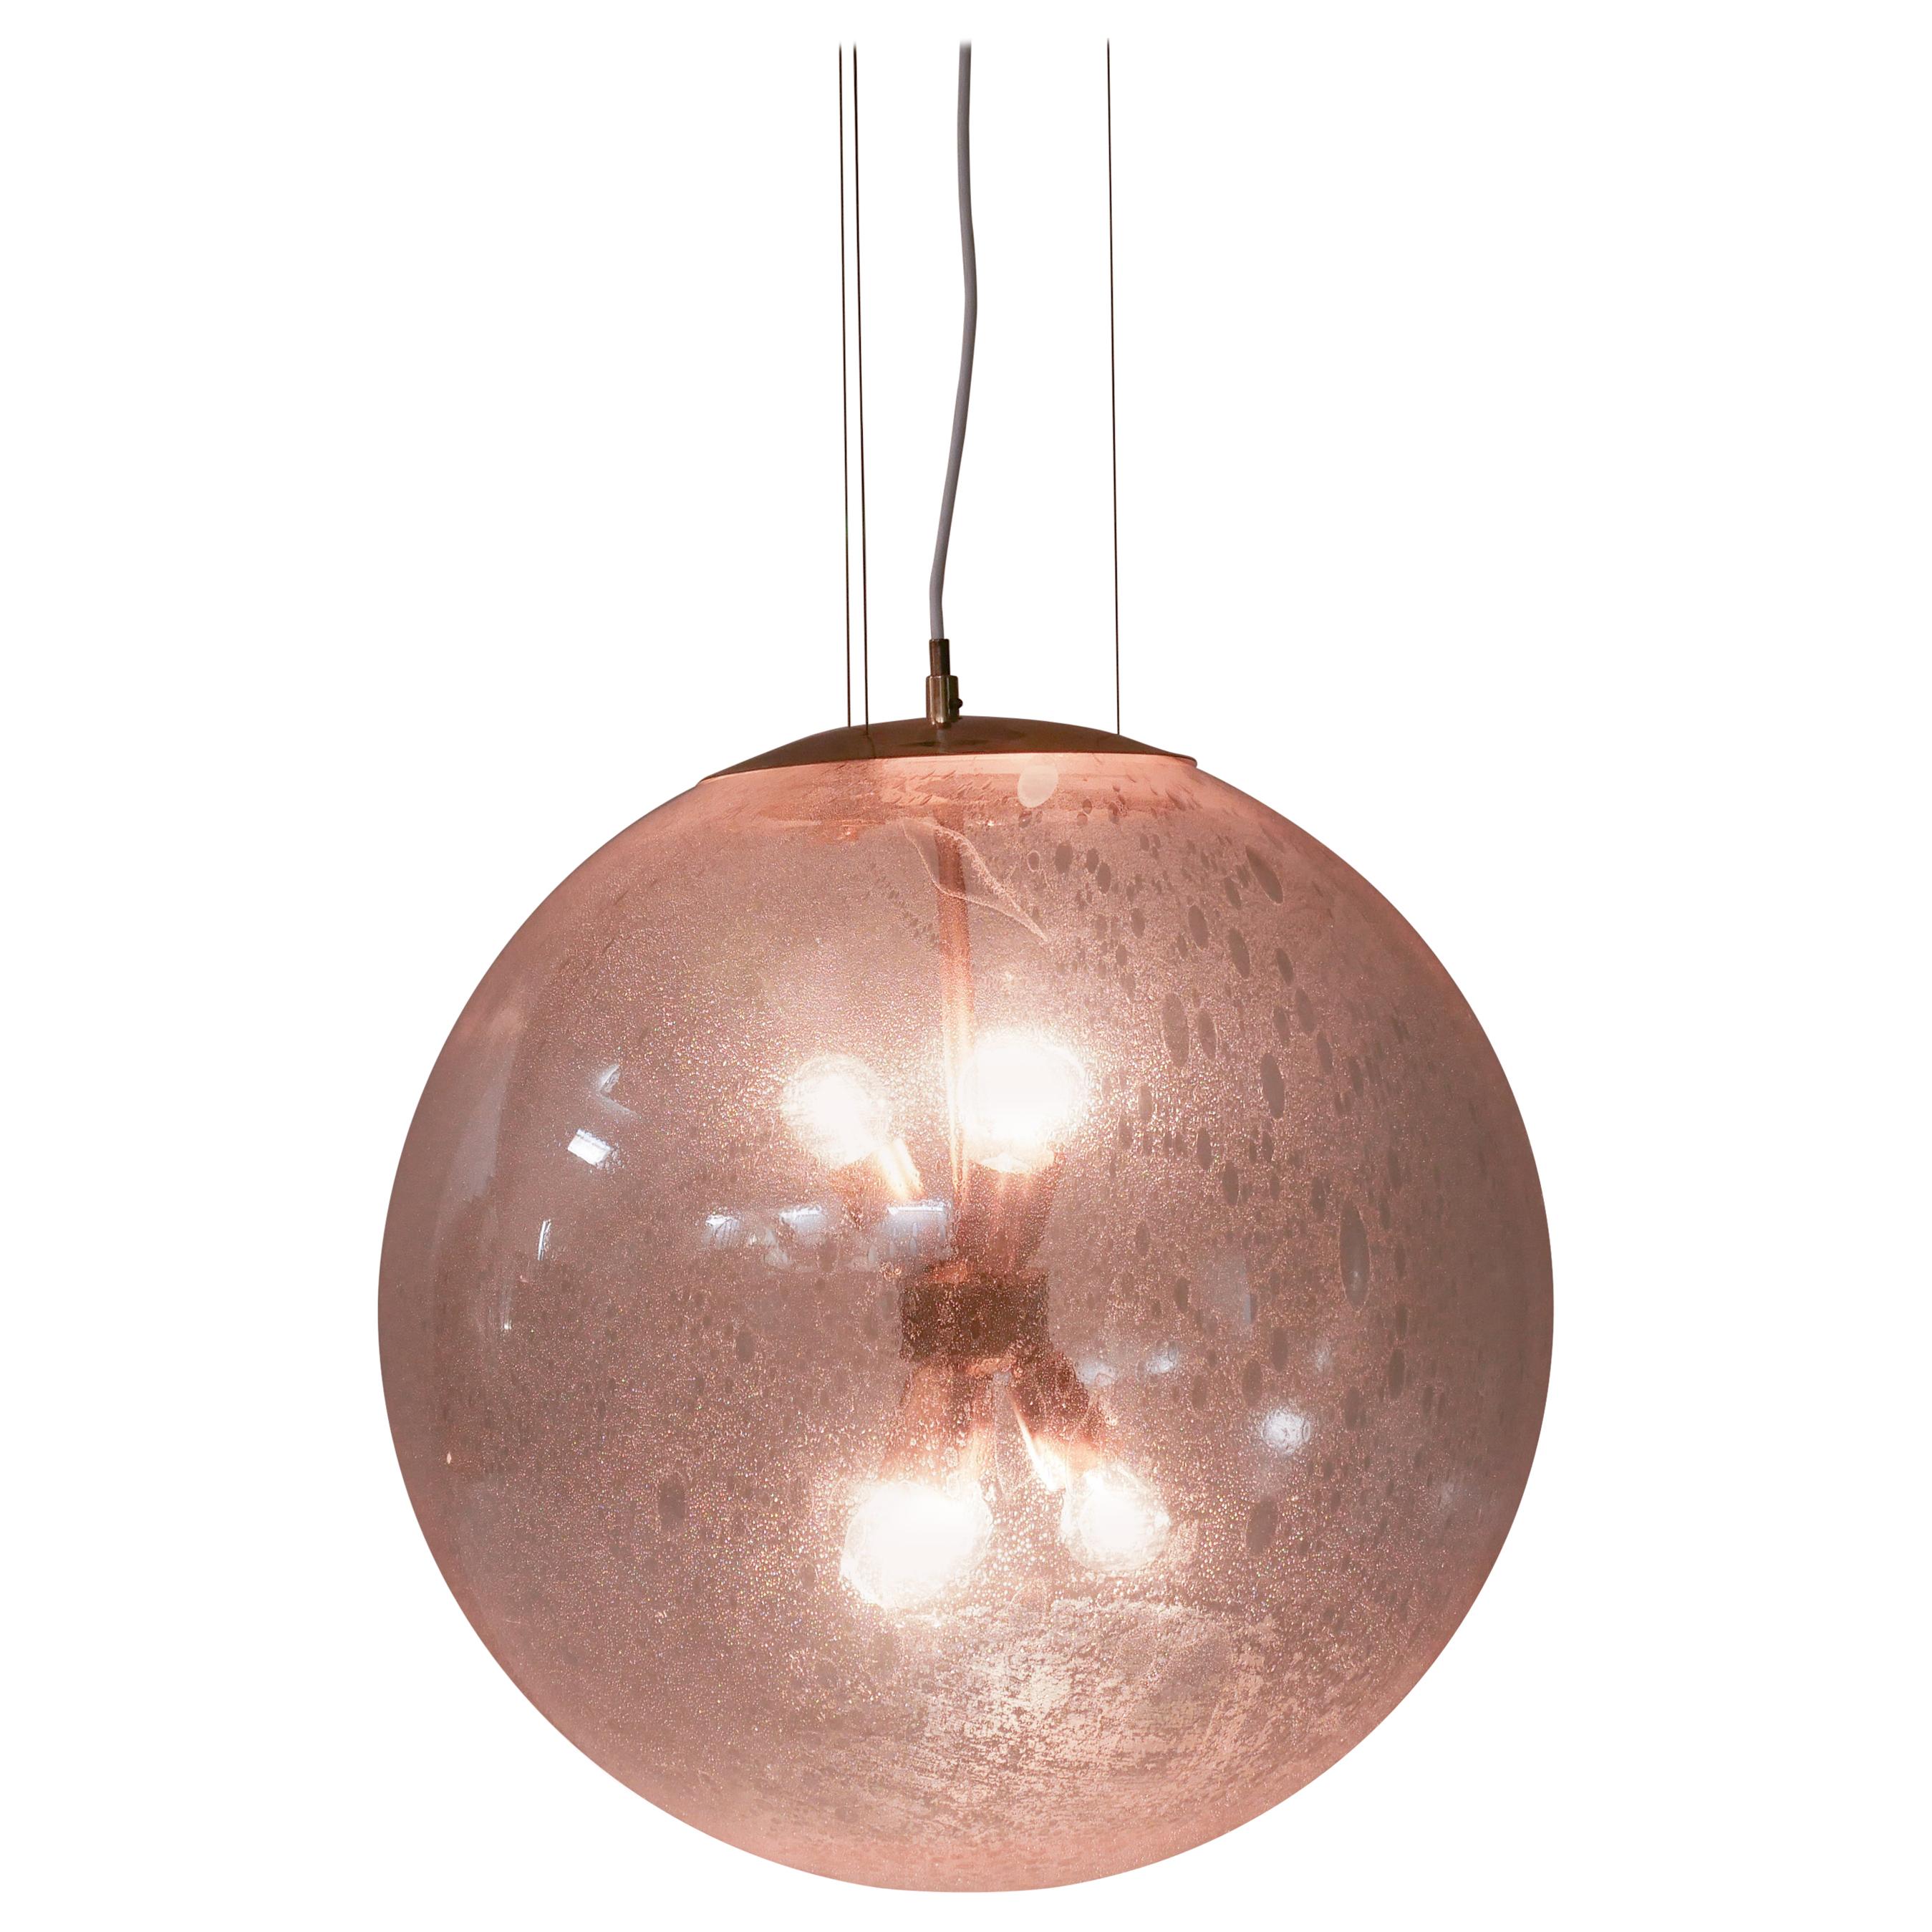 Uniqe Hans-Agne Jakobsson Wire Suspended Lamp, One of Four in the World For Sale